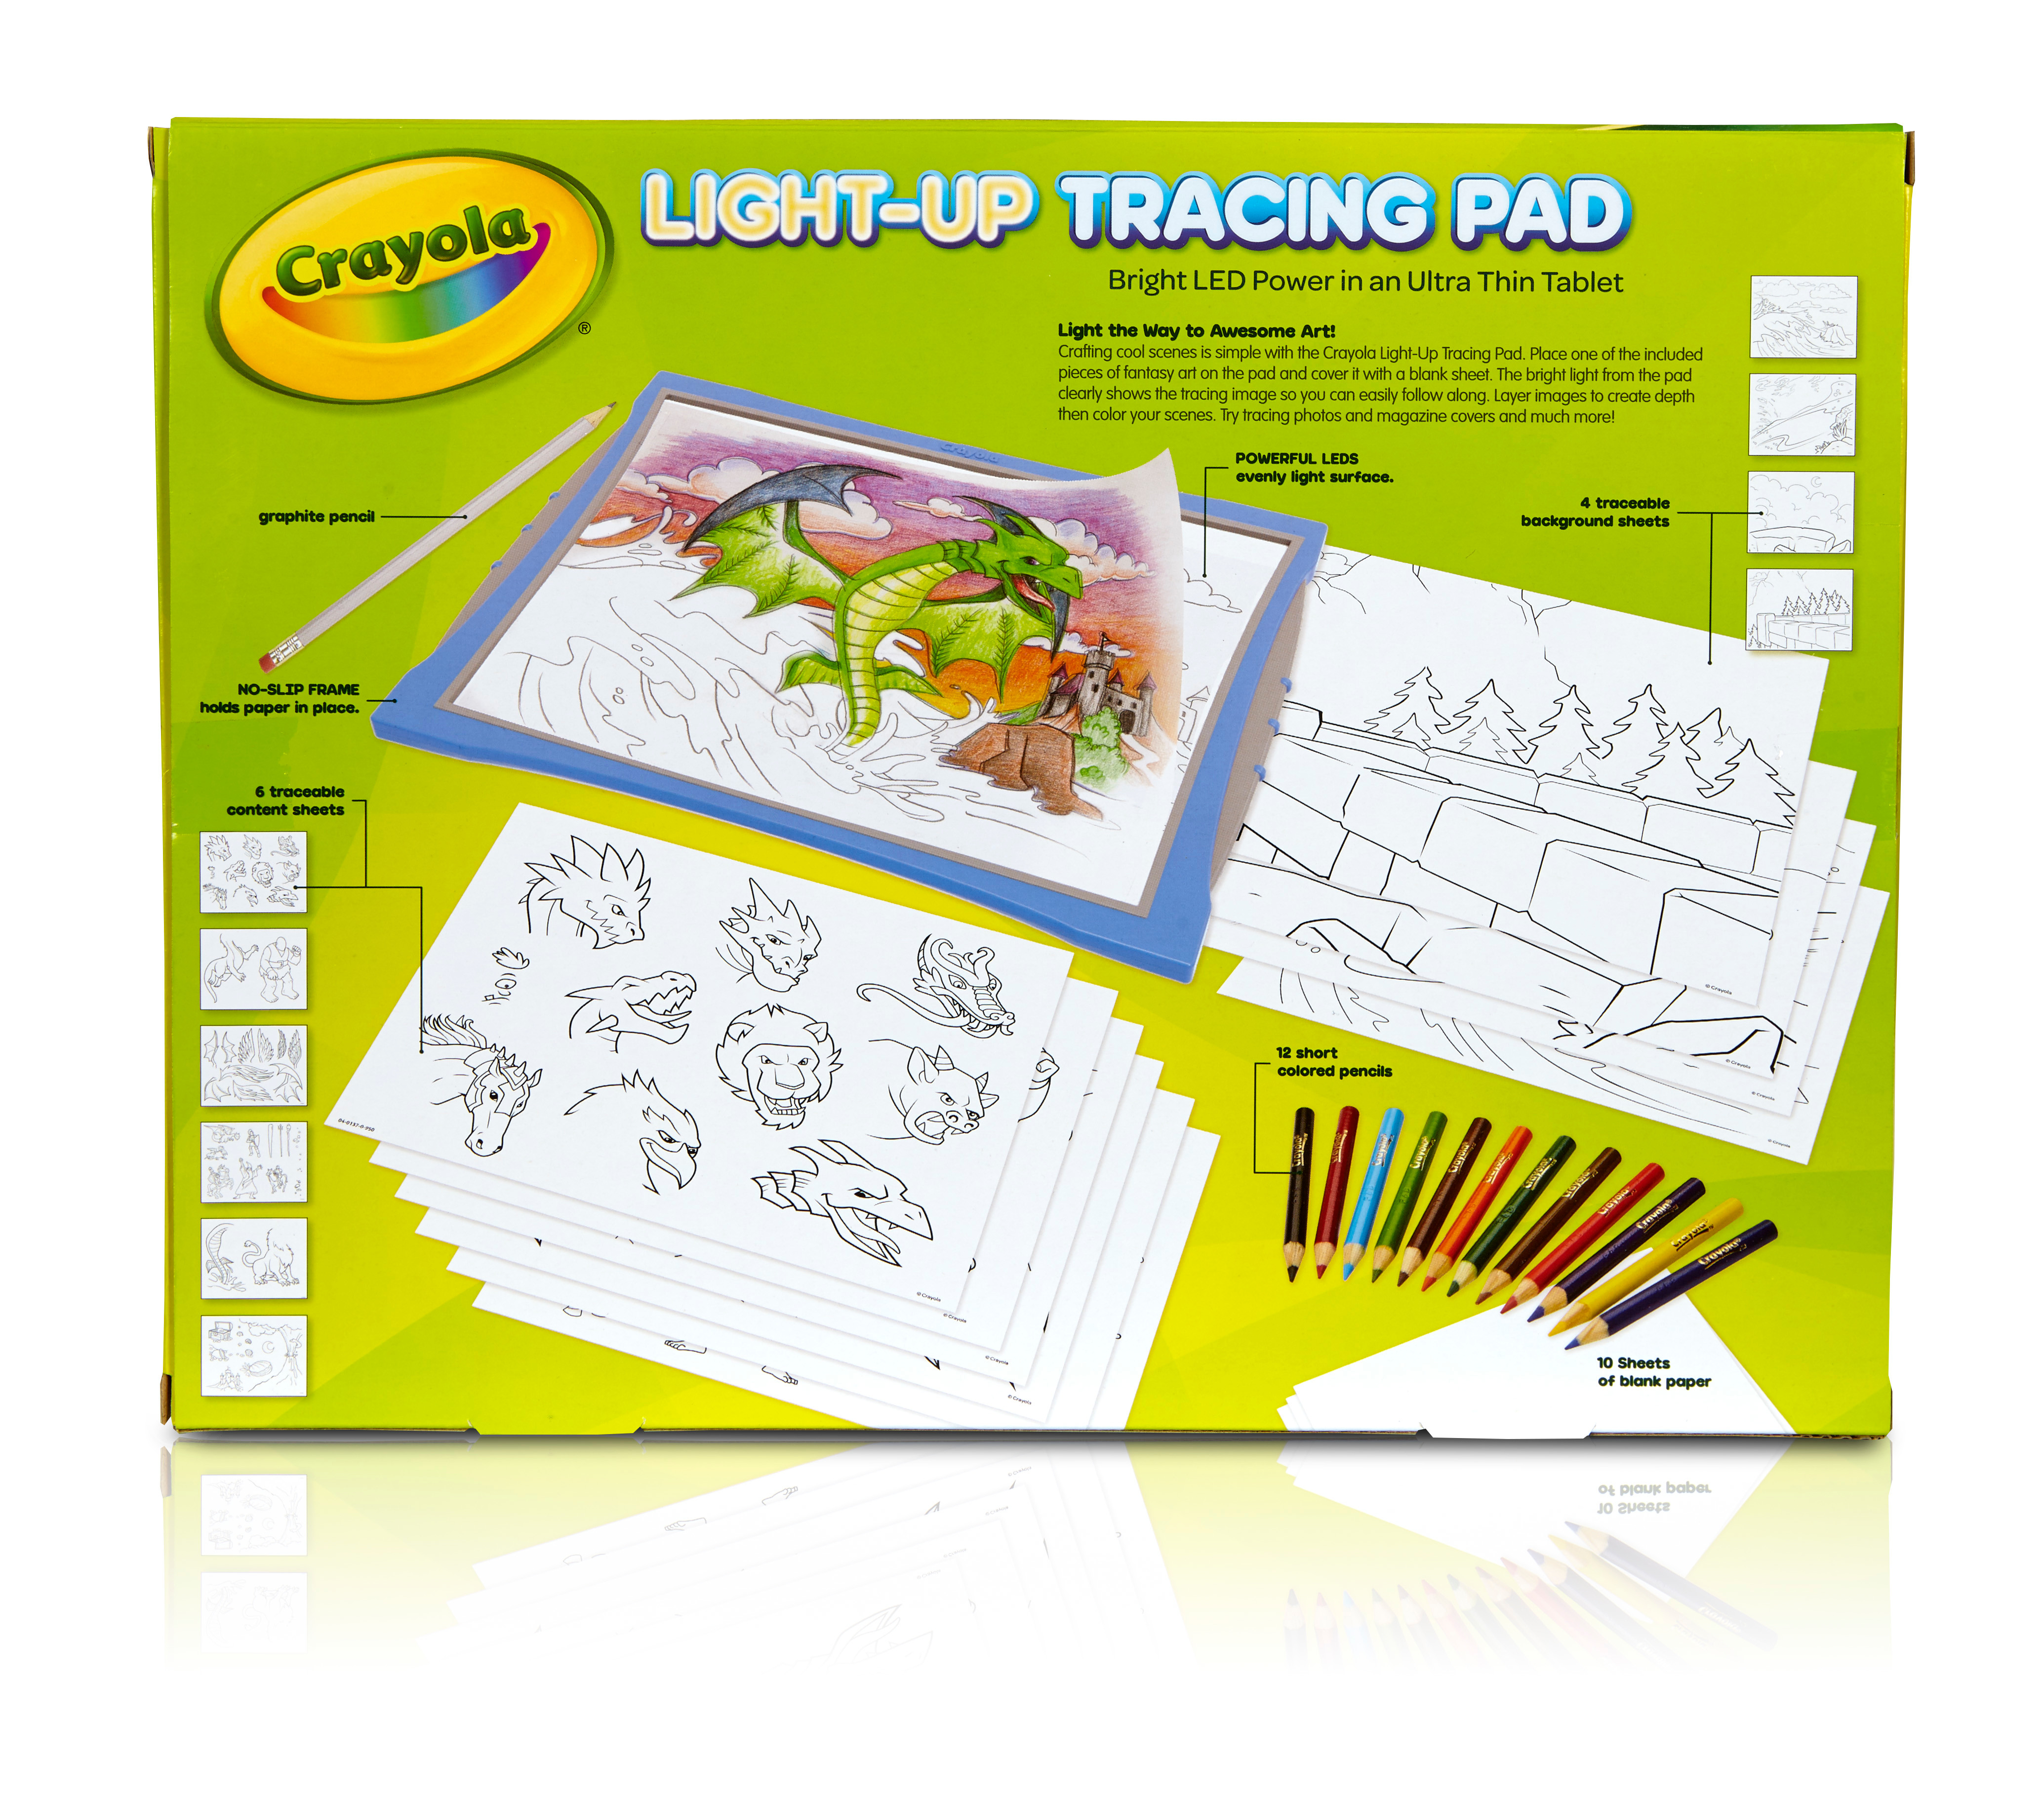 Crayola Light-Up Tracing Pad, Blue, School Supplies, Art Set, Gifts for Girls & Boys, Beginner Child - image 6 of 9